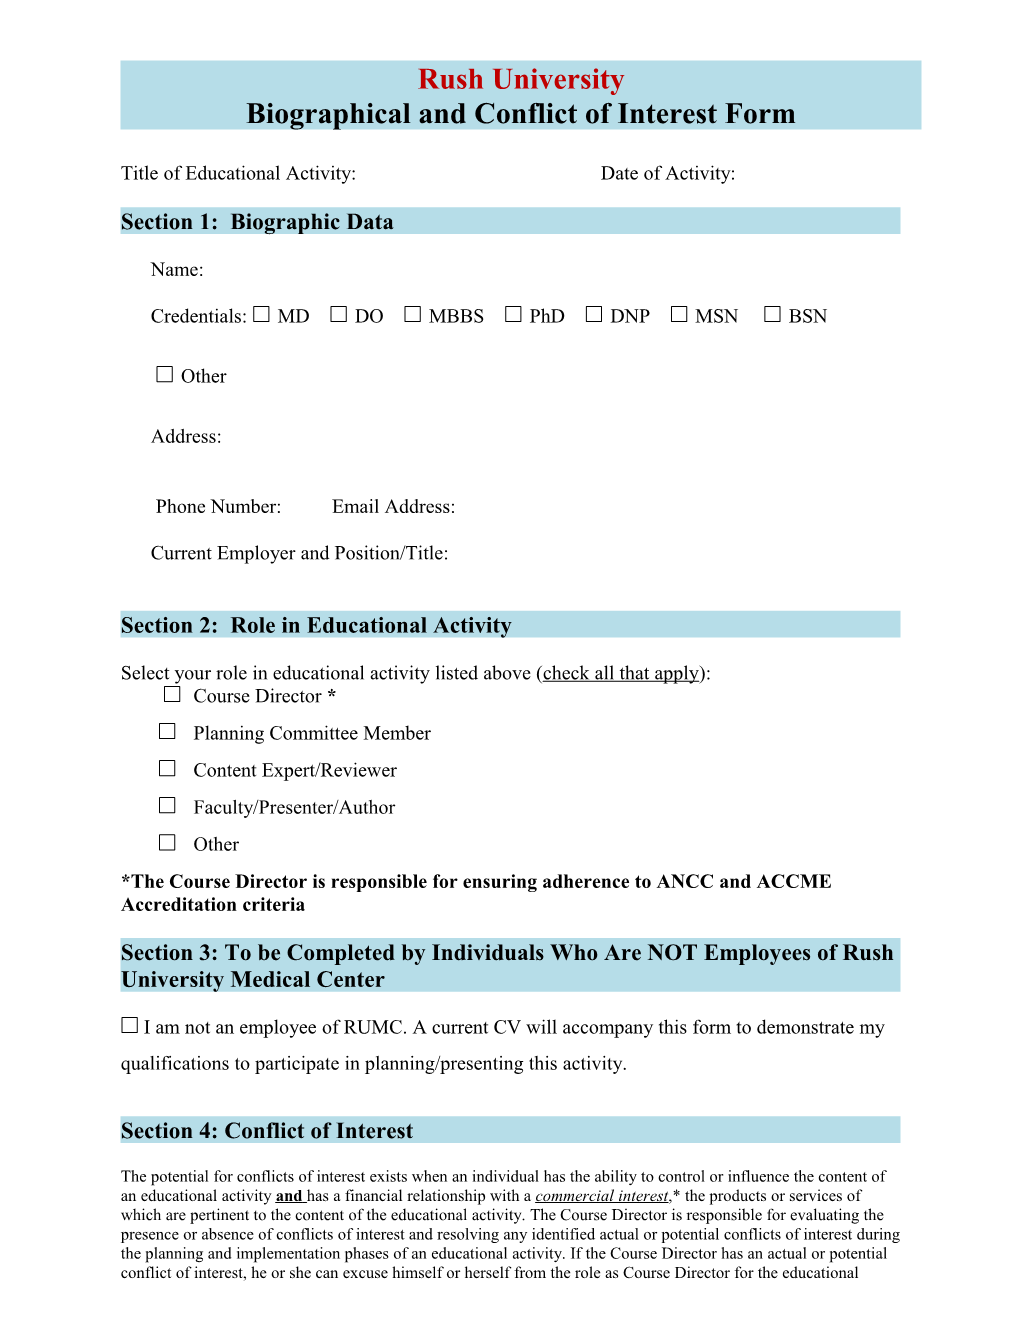 Biographical and Conflict of Interest Form s1